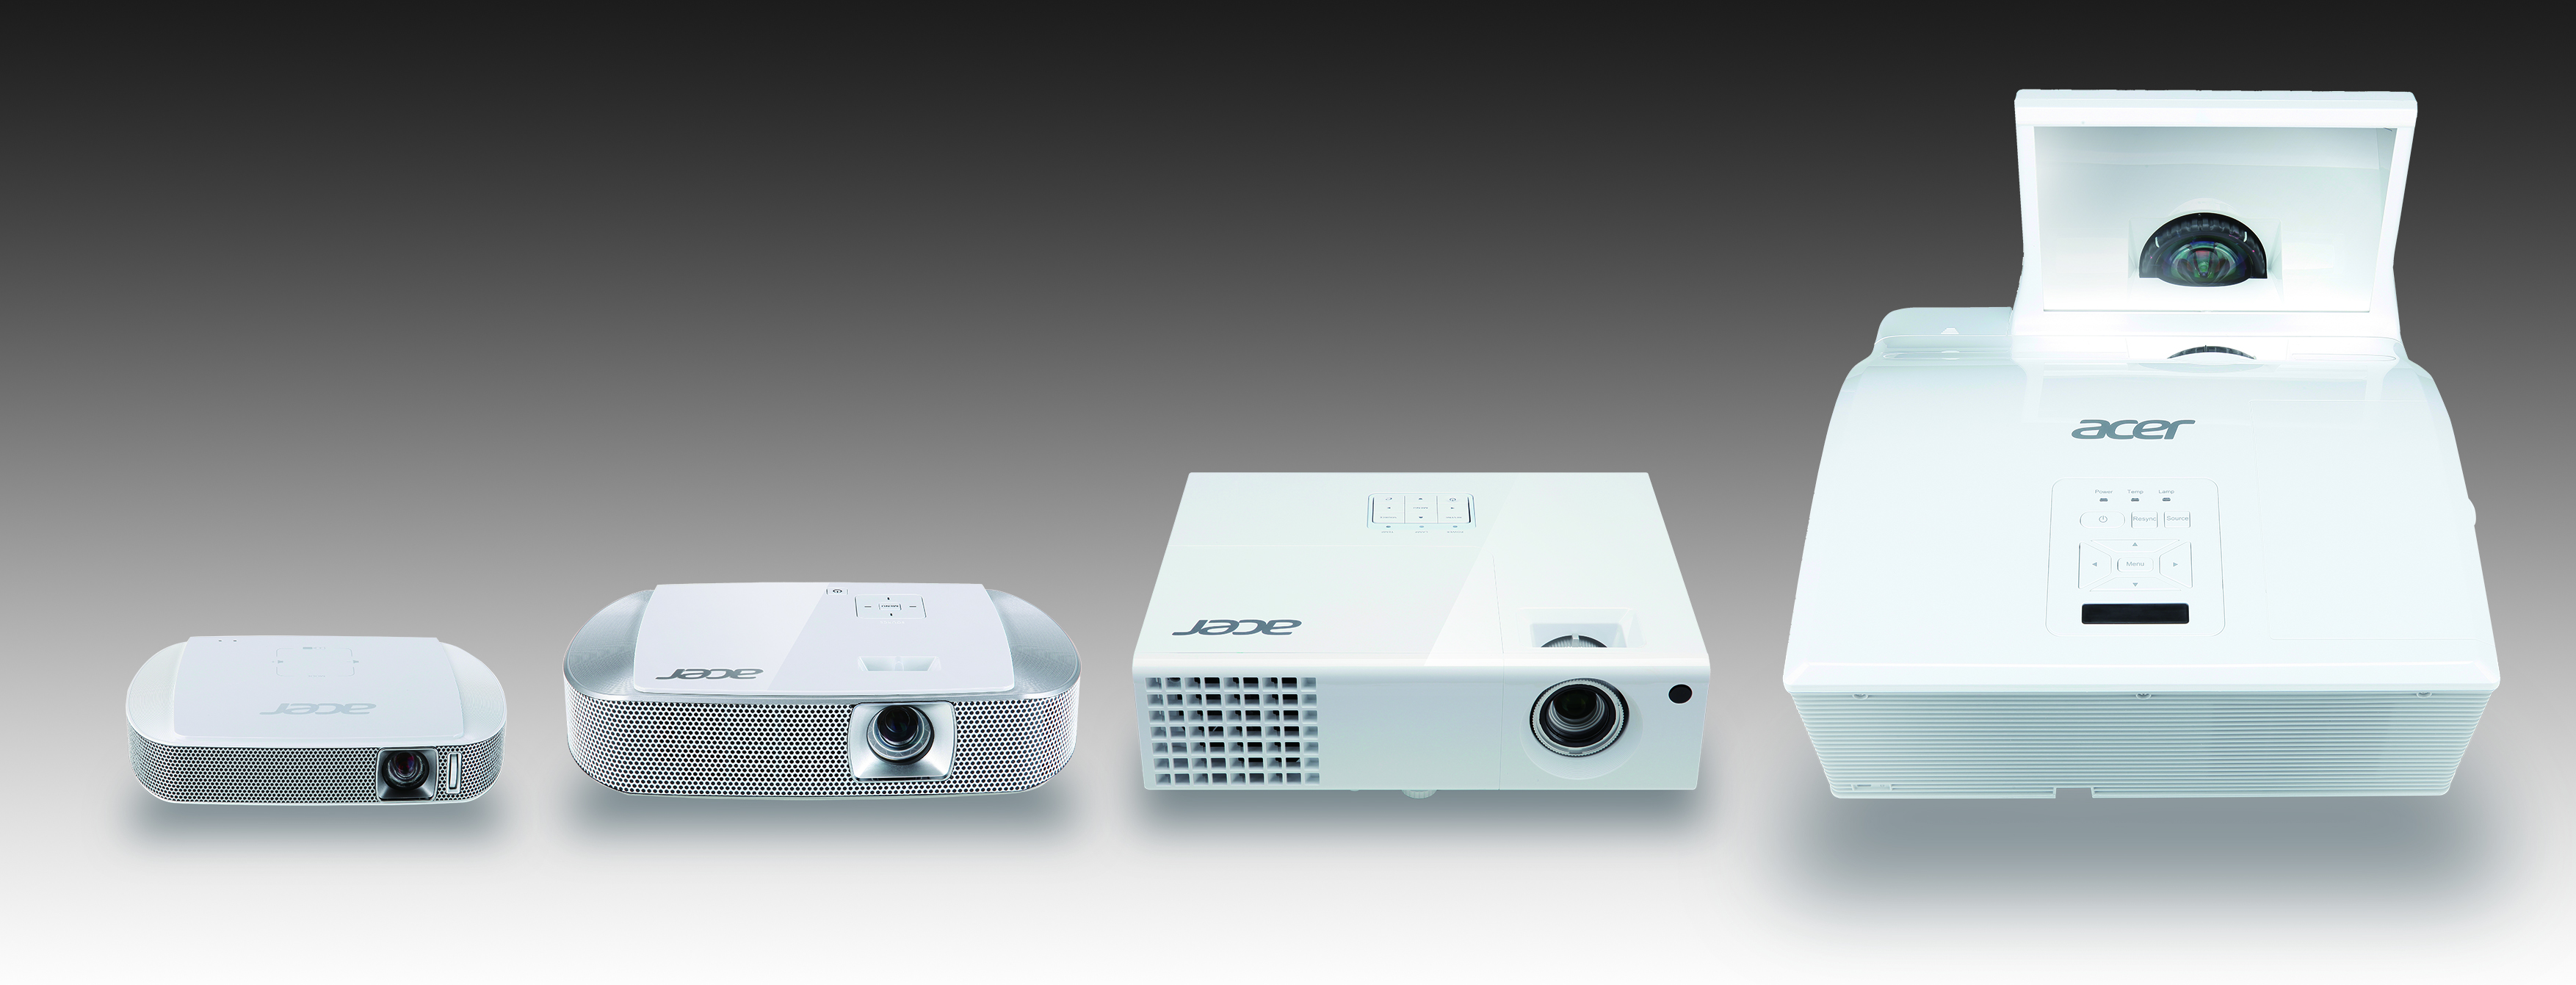 Acer offers a comprehensive portfolio of projectors targeting enterprise, small medium business, education, and home entertainment markets.